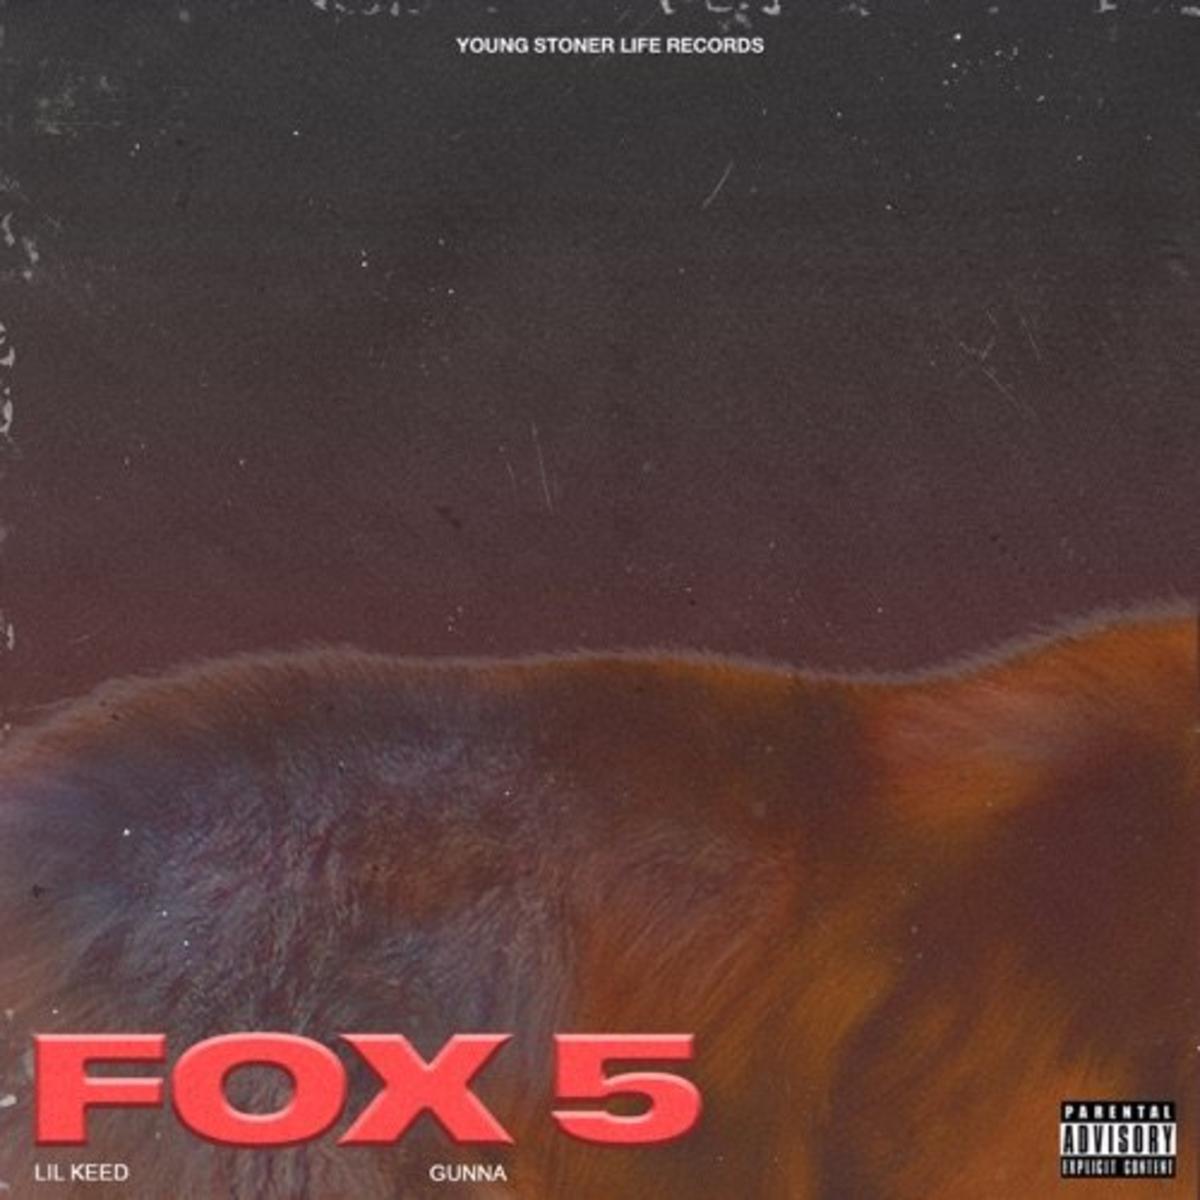 Lil Keed & Gunna Join Forces For “Fox 5”